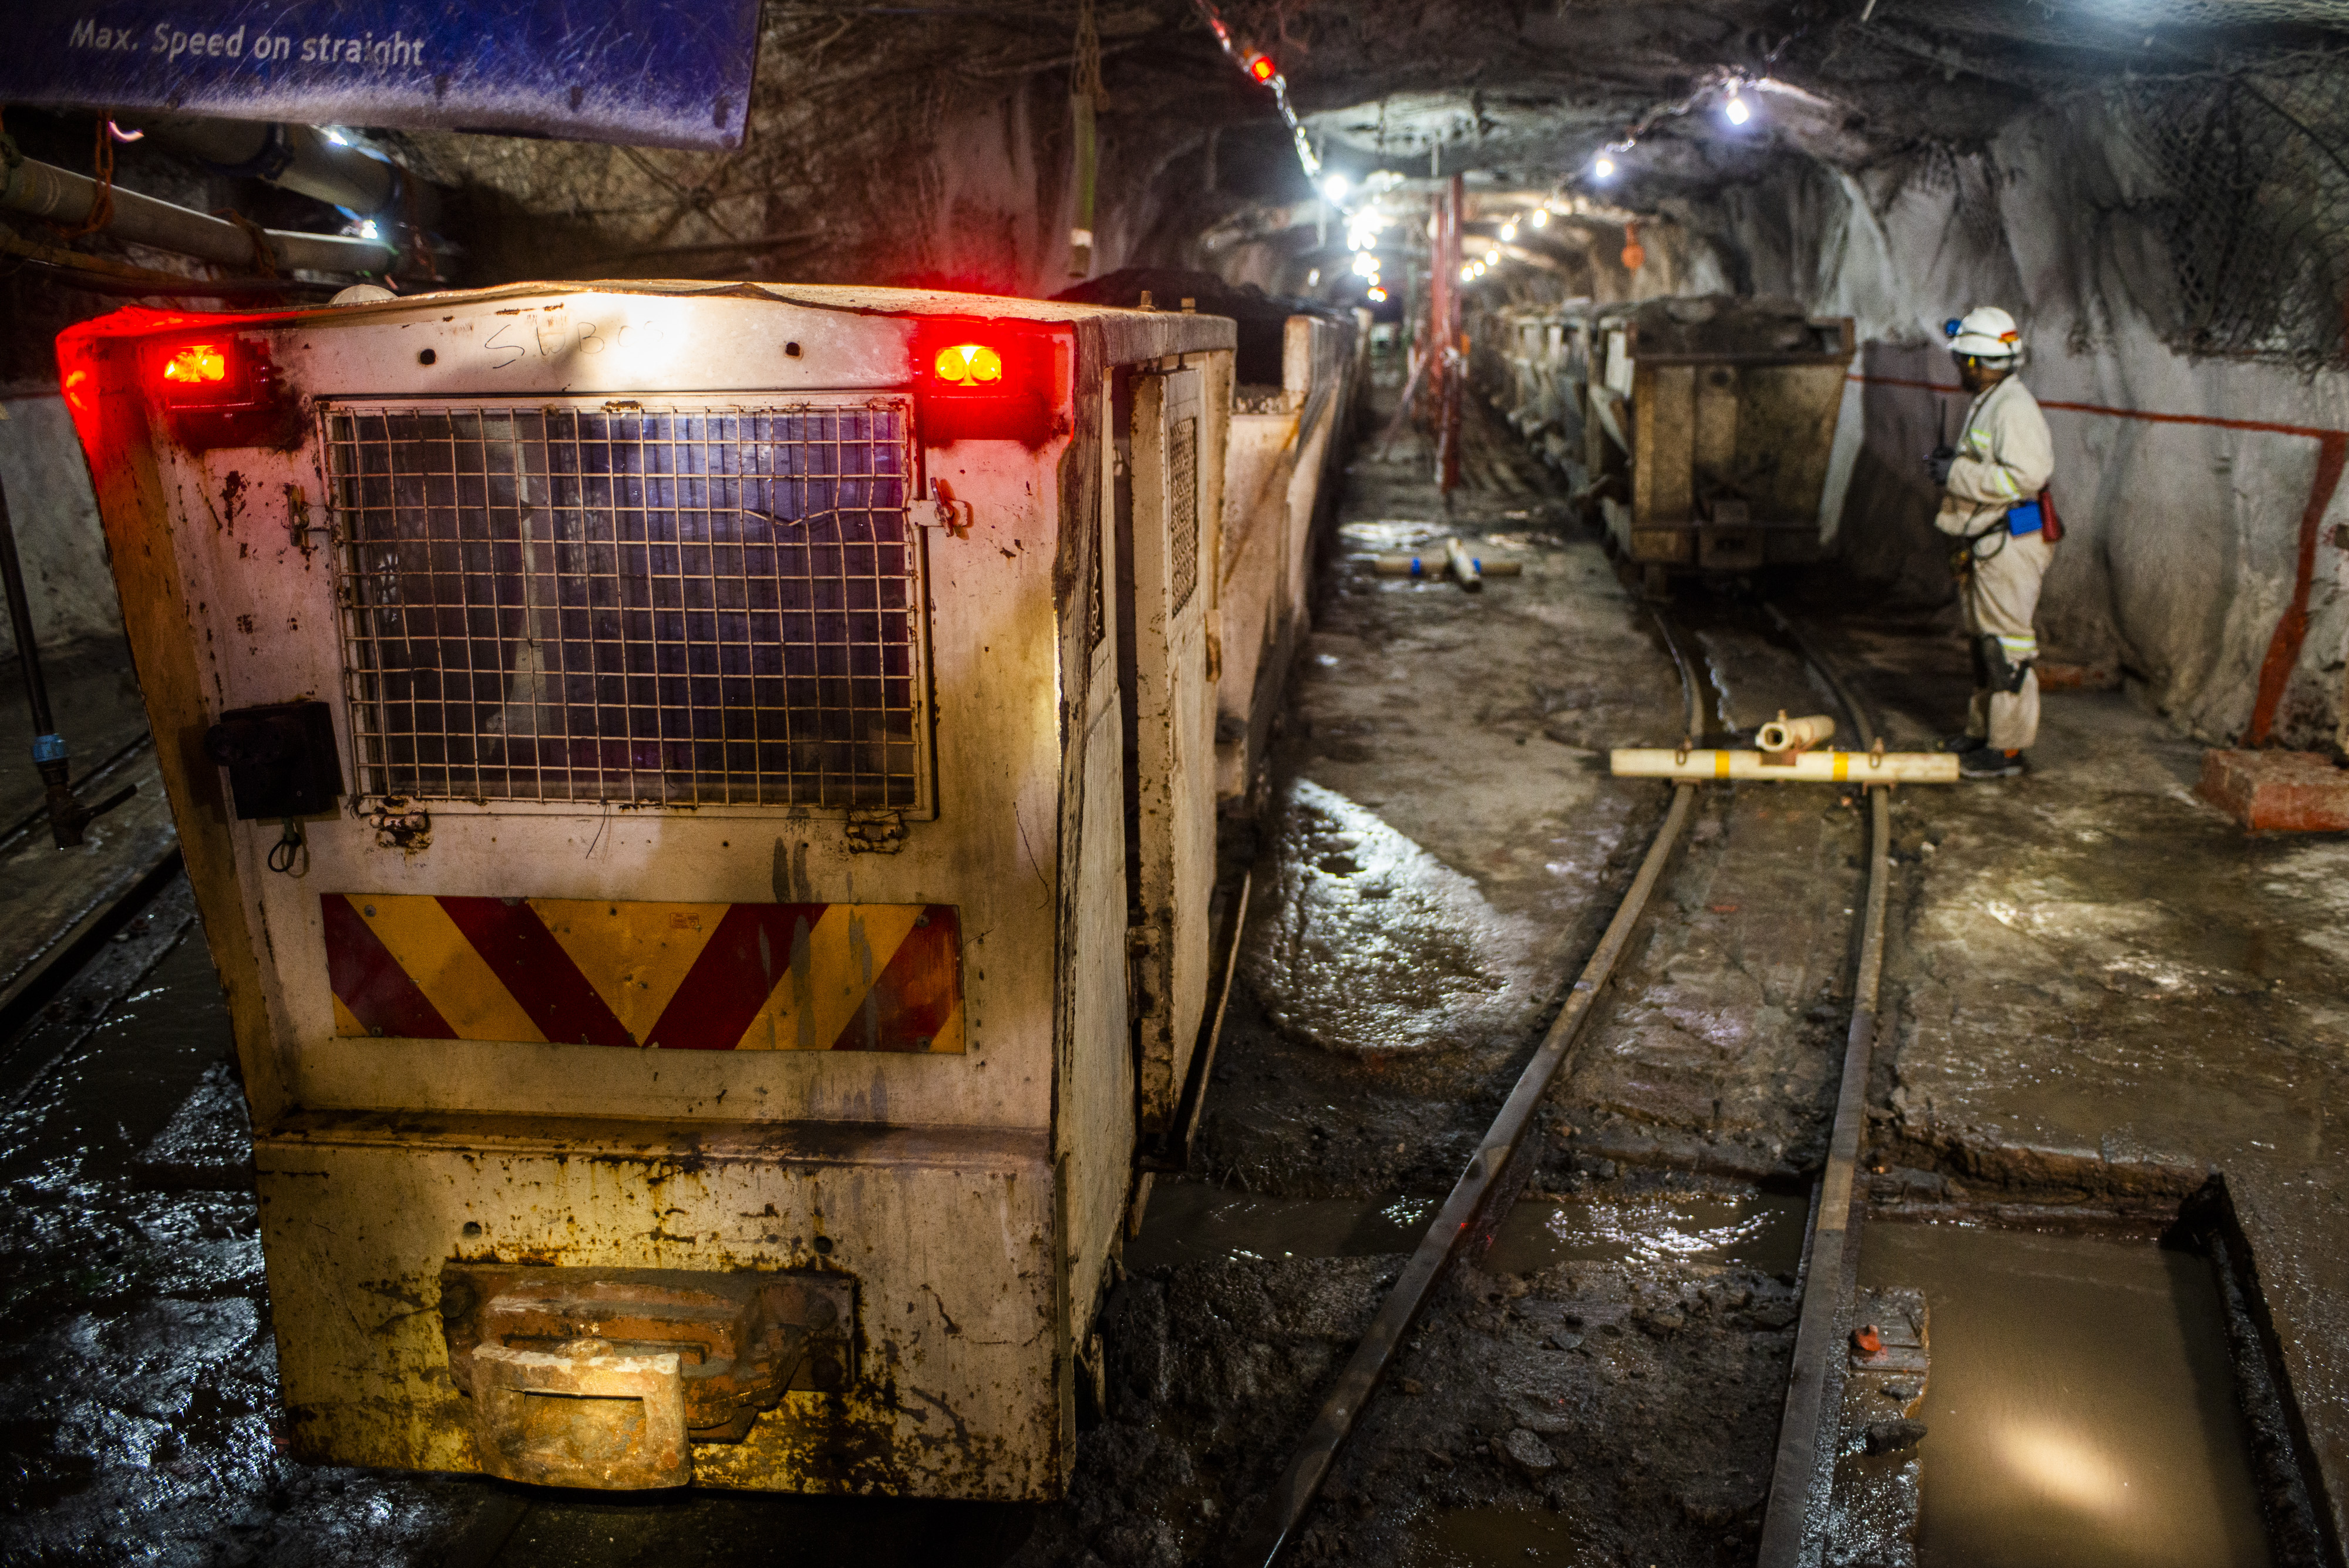 Freight wagons containing mined platinum rich rock stand on tracks in the mine shaft ready for transport to the surface during a media tour of the Sibanye-Stillwater Khuseleka platinum mine, operated by Sibanye Gold Ltd., outside Rustenburg, South Africa on Wednesday, Oct. 16 2019. (Waldo Swiegers/Bloomberg —Getty Images)